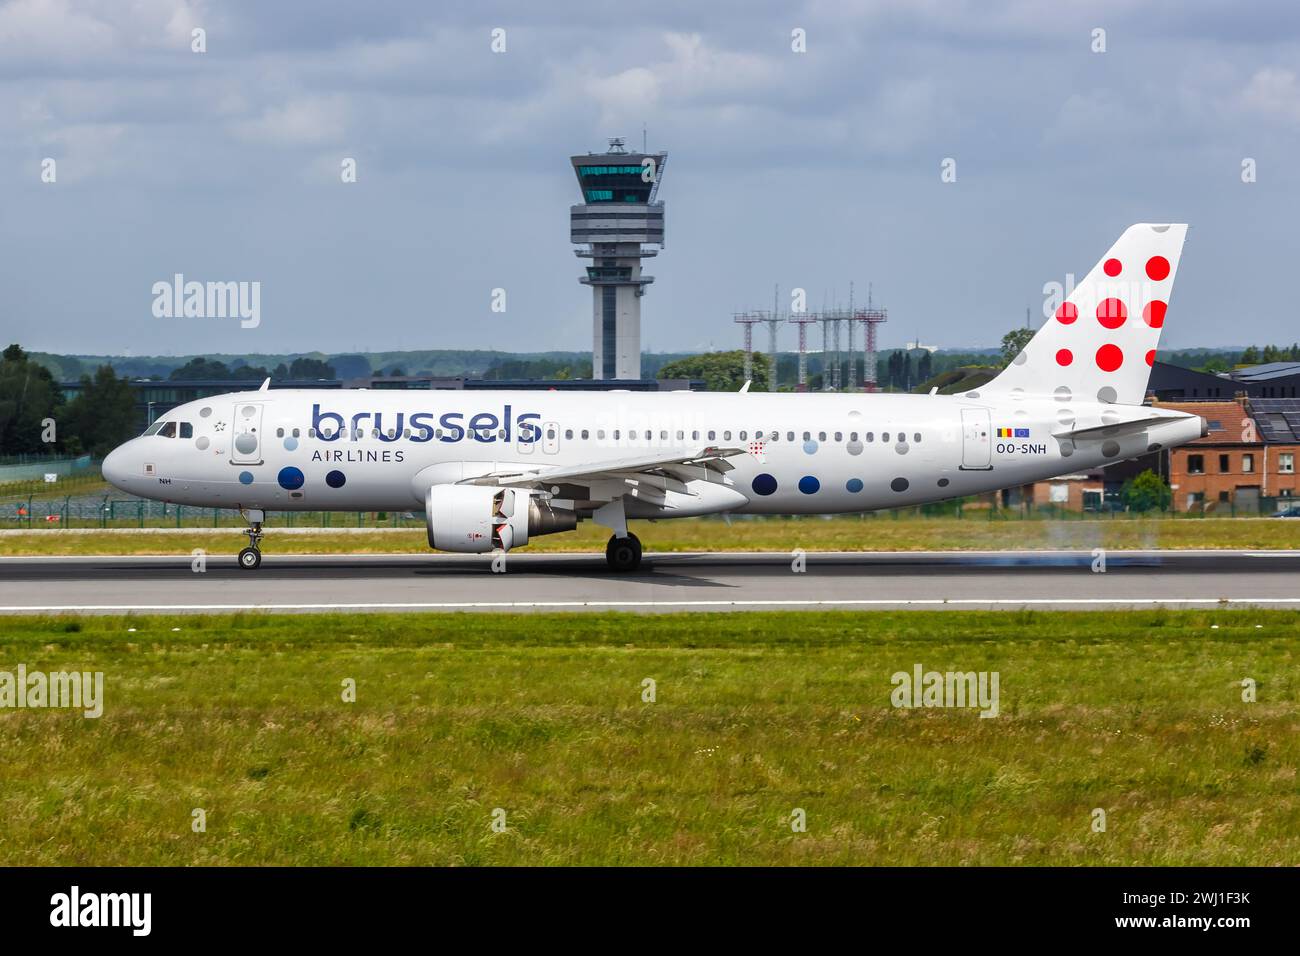 Brussels Airlines Airbus A320 aircraft Brussels Airport in Belgium Stock Photo